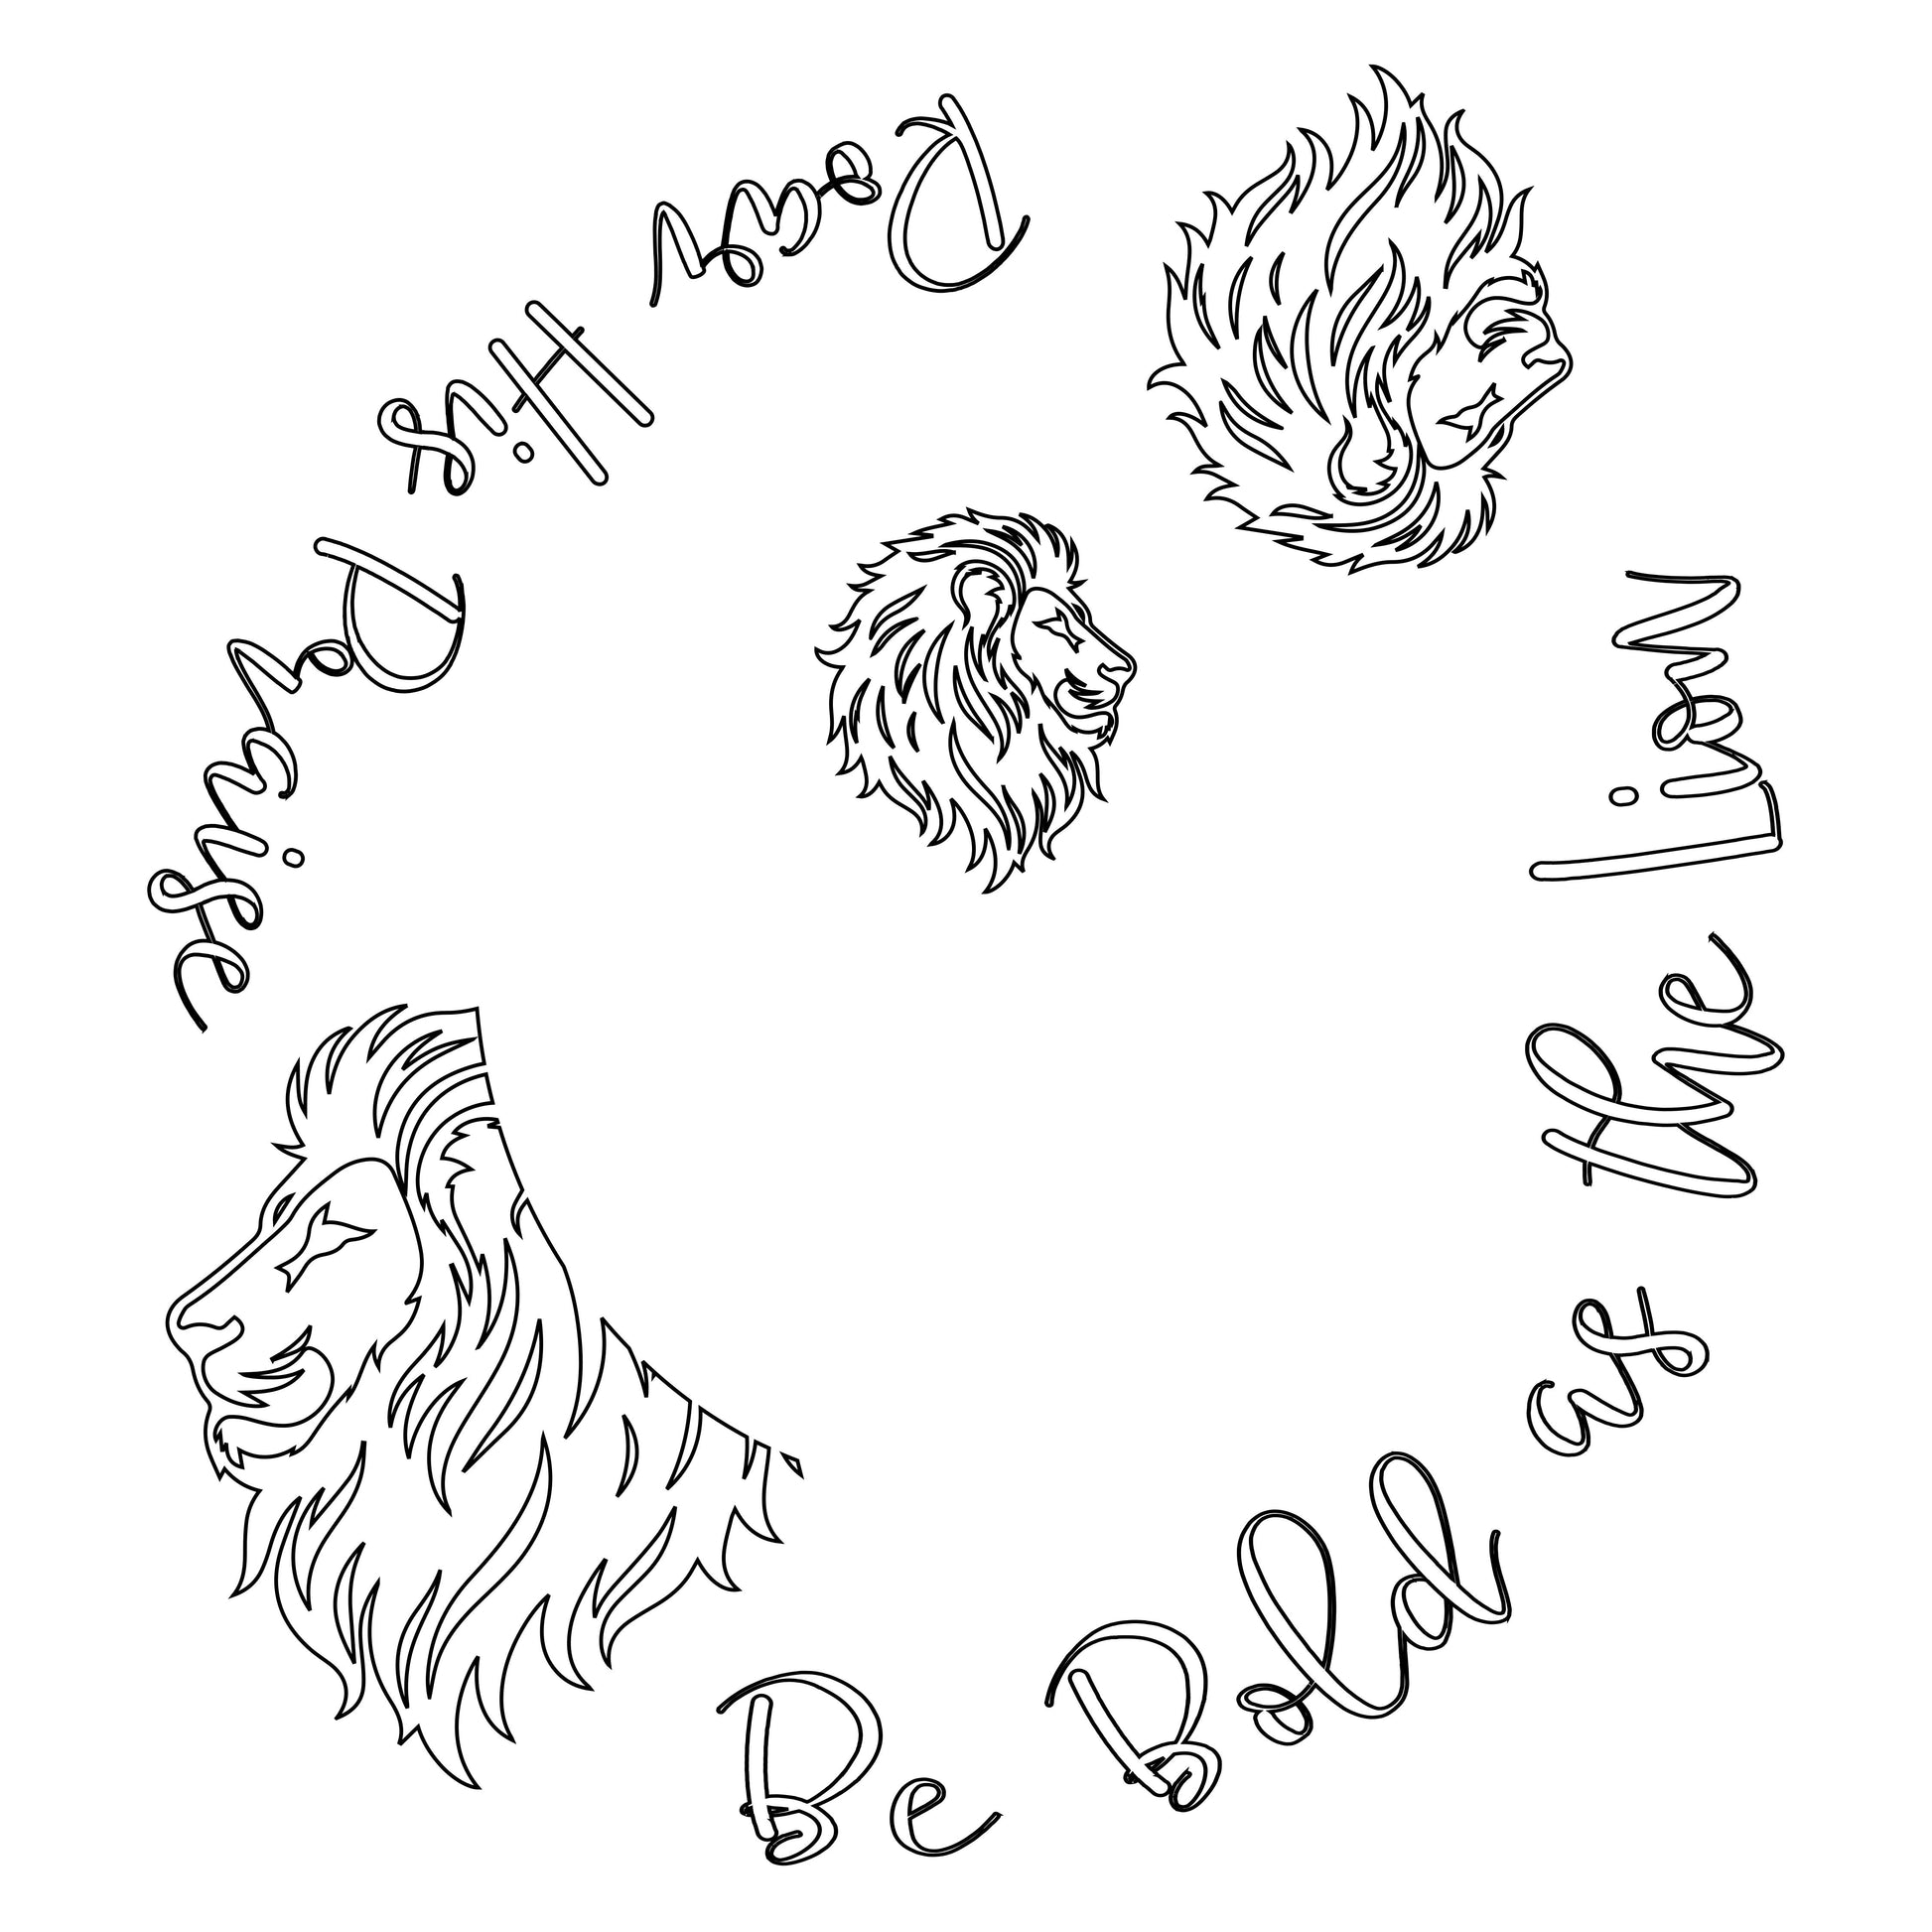 Be Bold As The Lion Roar His Praise hat burning design